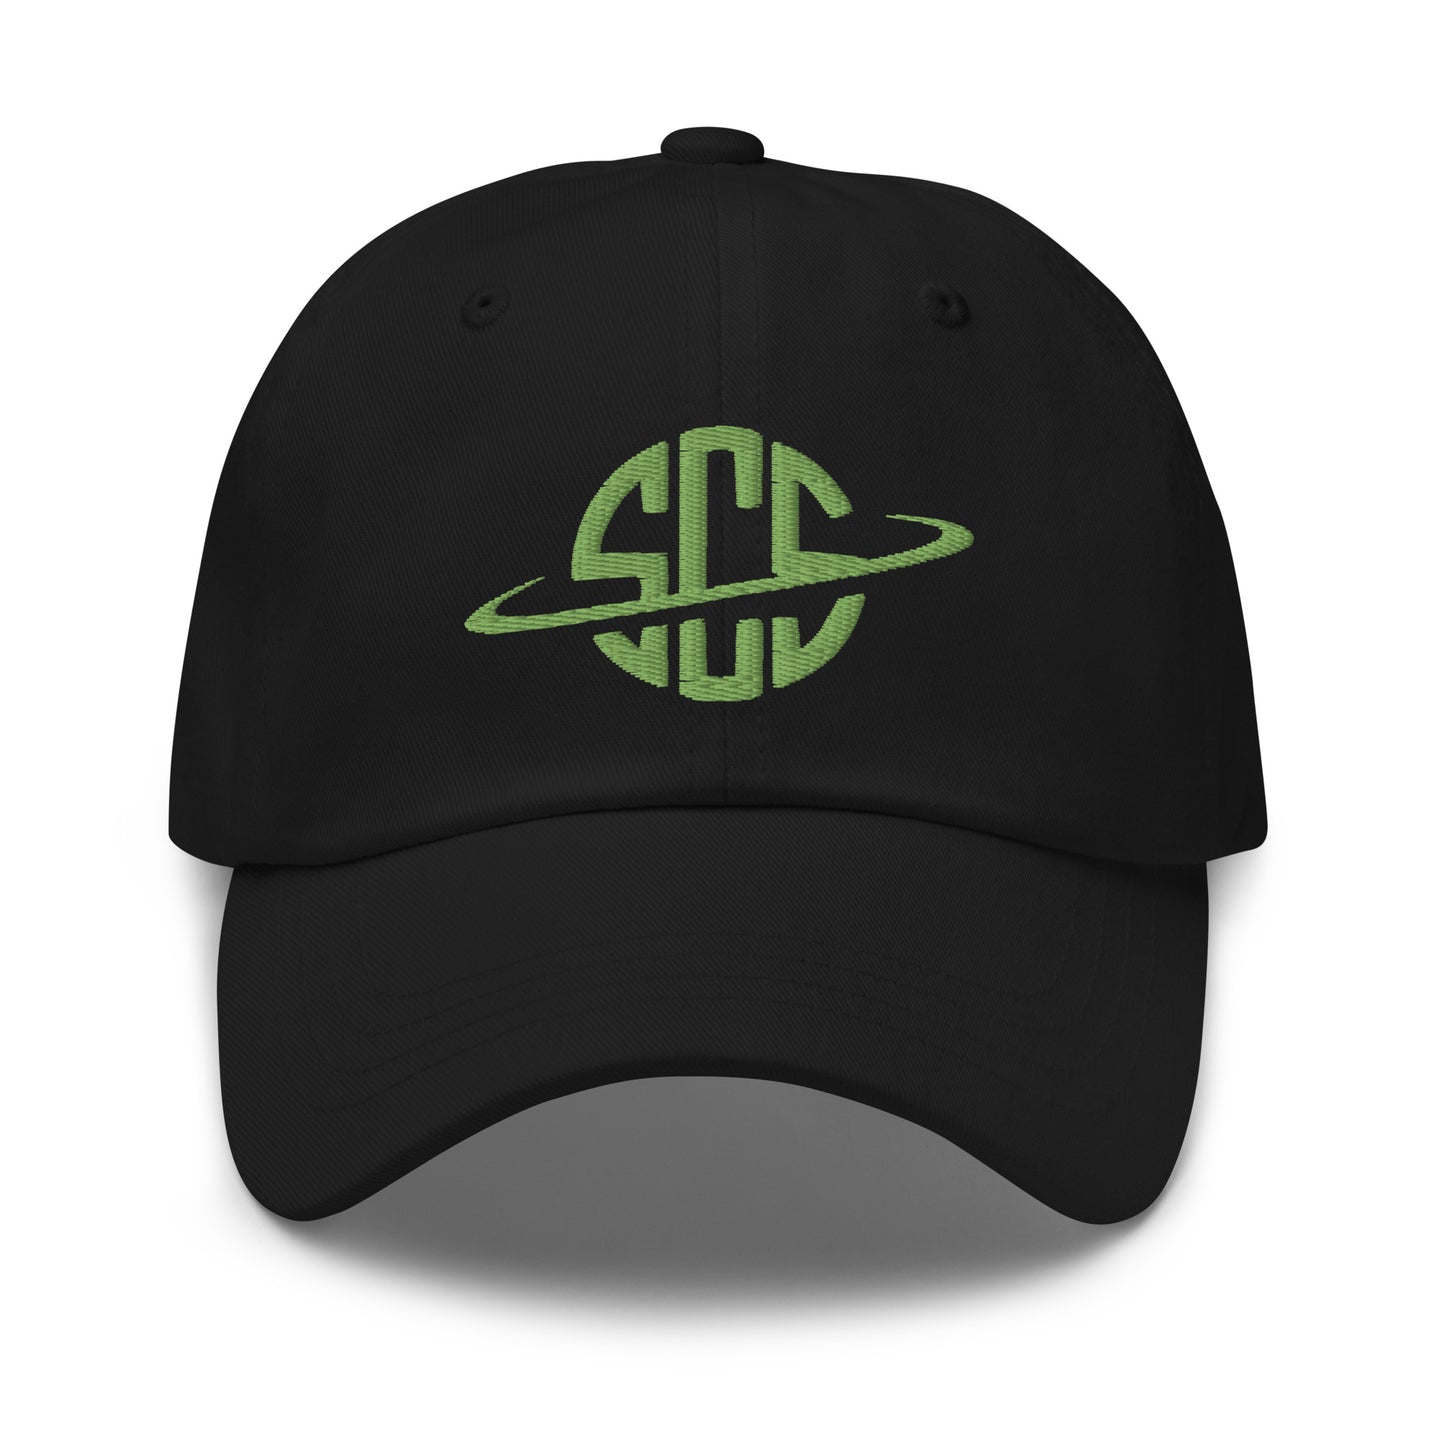 SCS - Embroidered Dad hat